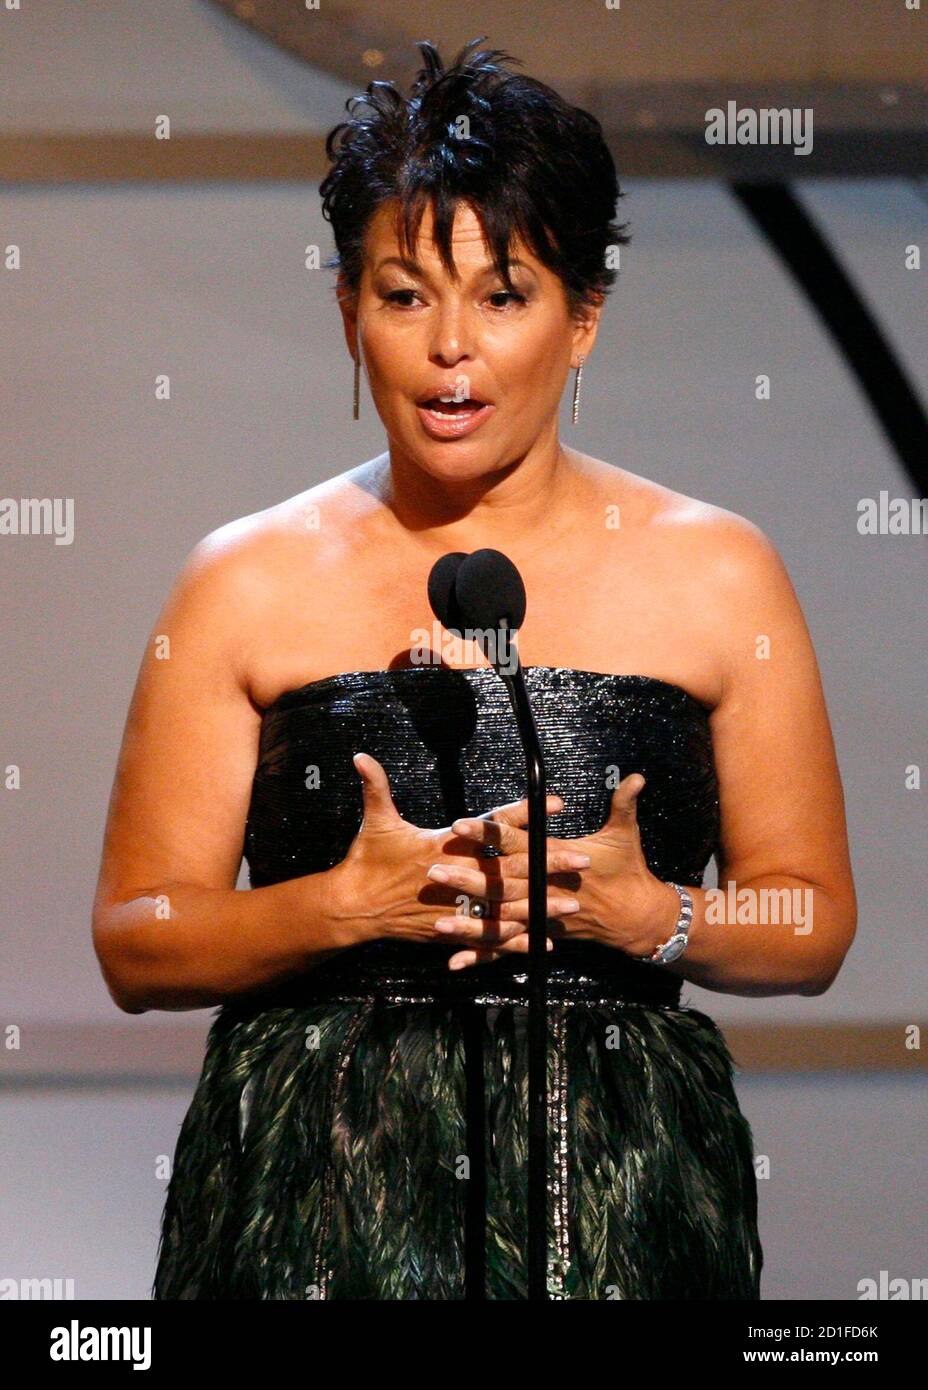 BET CEO Debra Lee speaks at the BET Awards '09 in Los Angeles June 28,  2009. REUTERS/Mario Anzuoni (UNITED STATES ENTERTAINMENT Stock Photo - Alamy